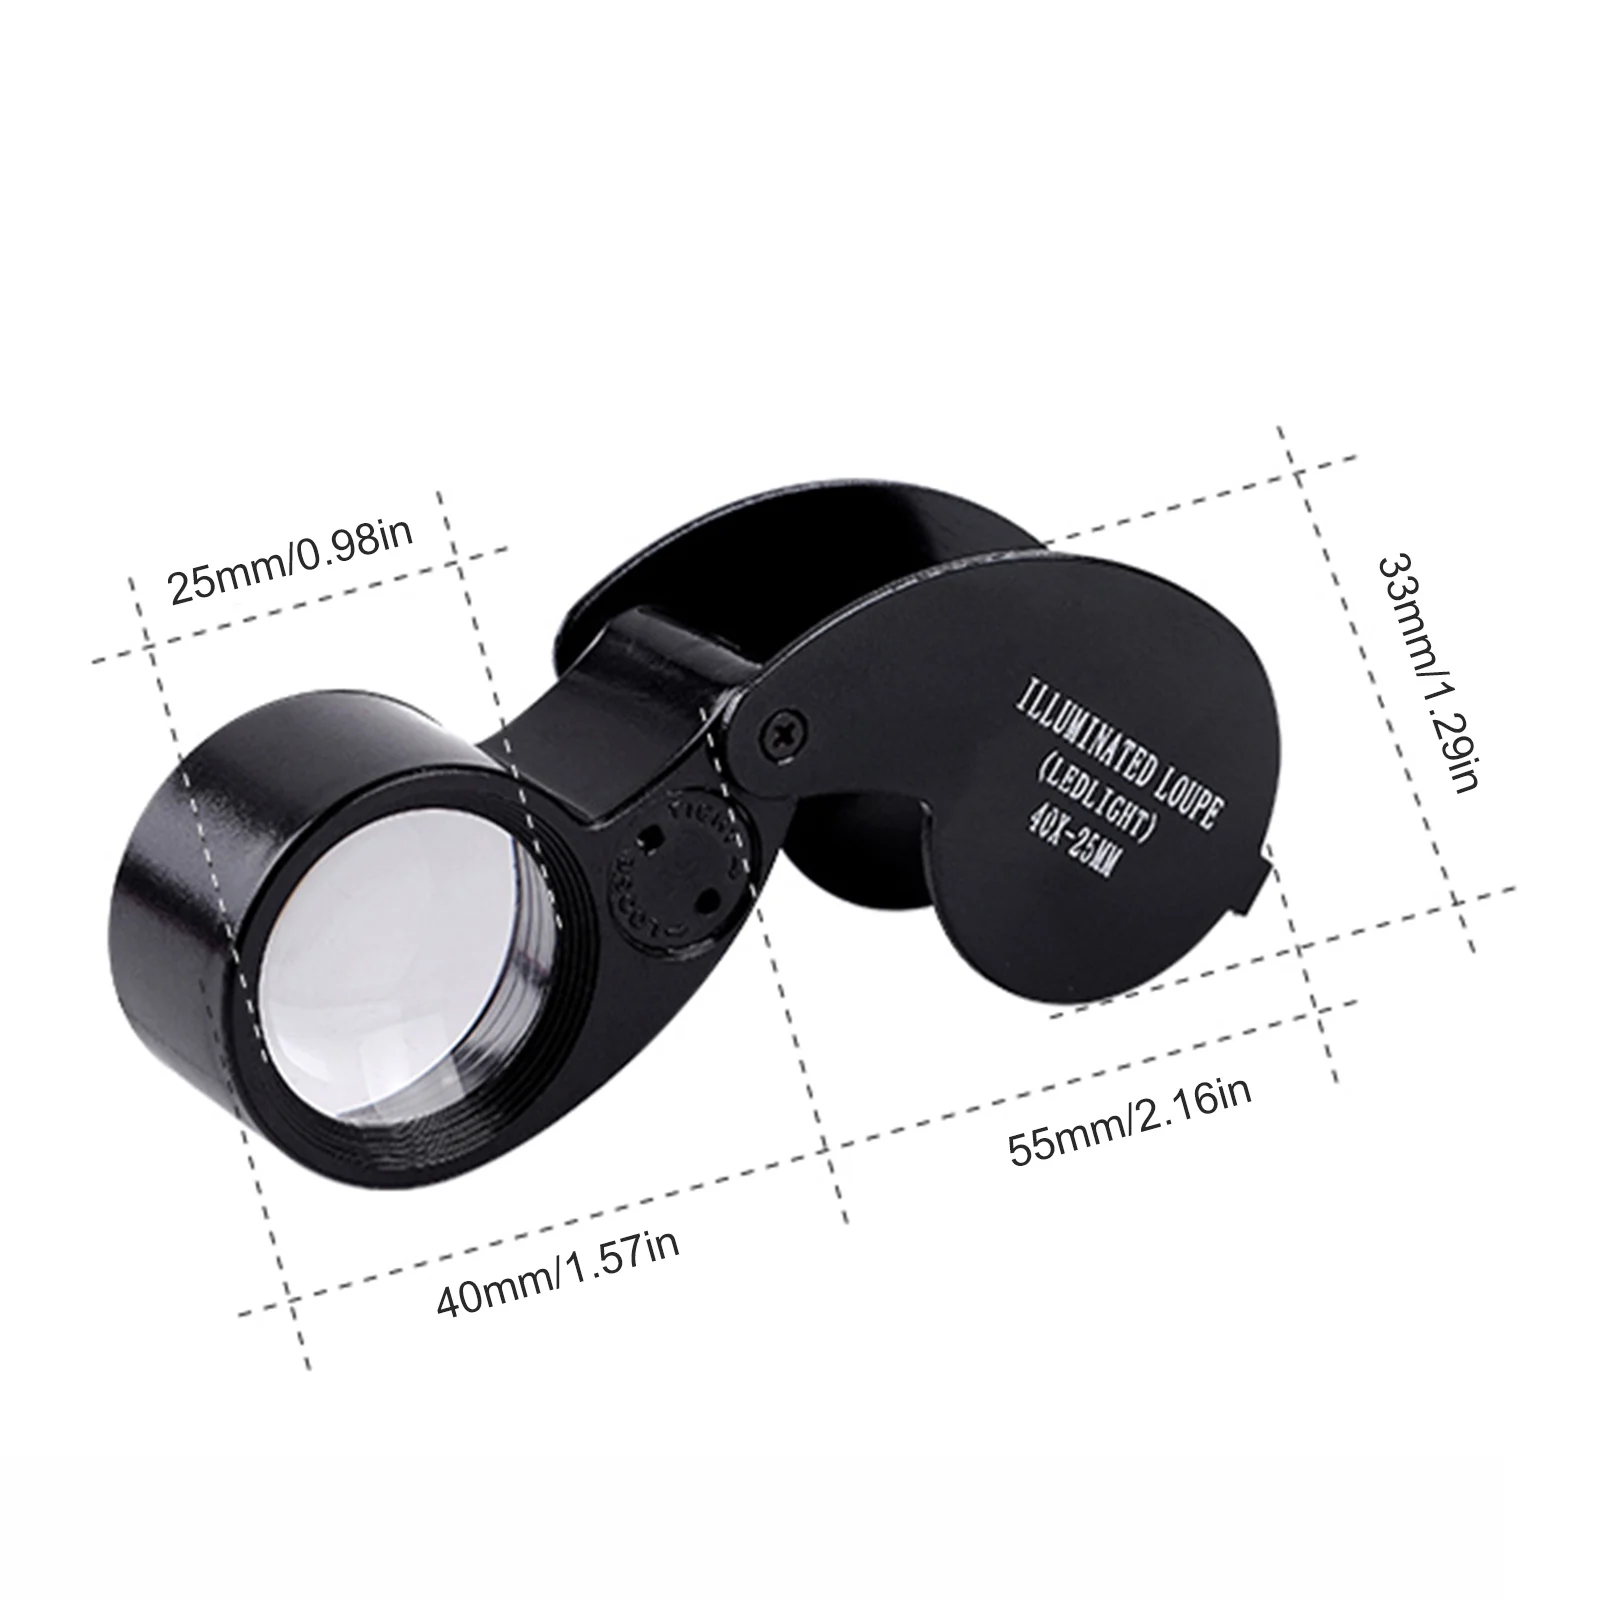 AC Infinity Jewelers Loupe, Pocket Magnifying Glass with LED Light & Dual Lenses